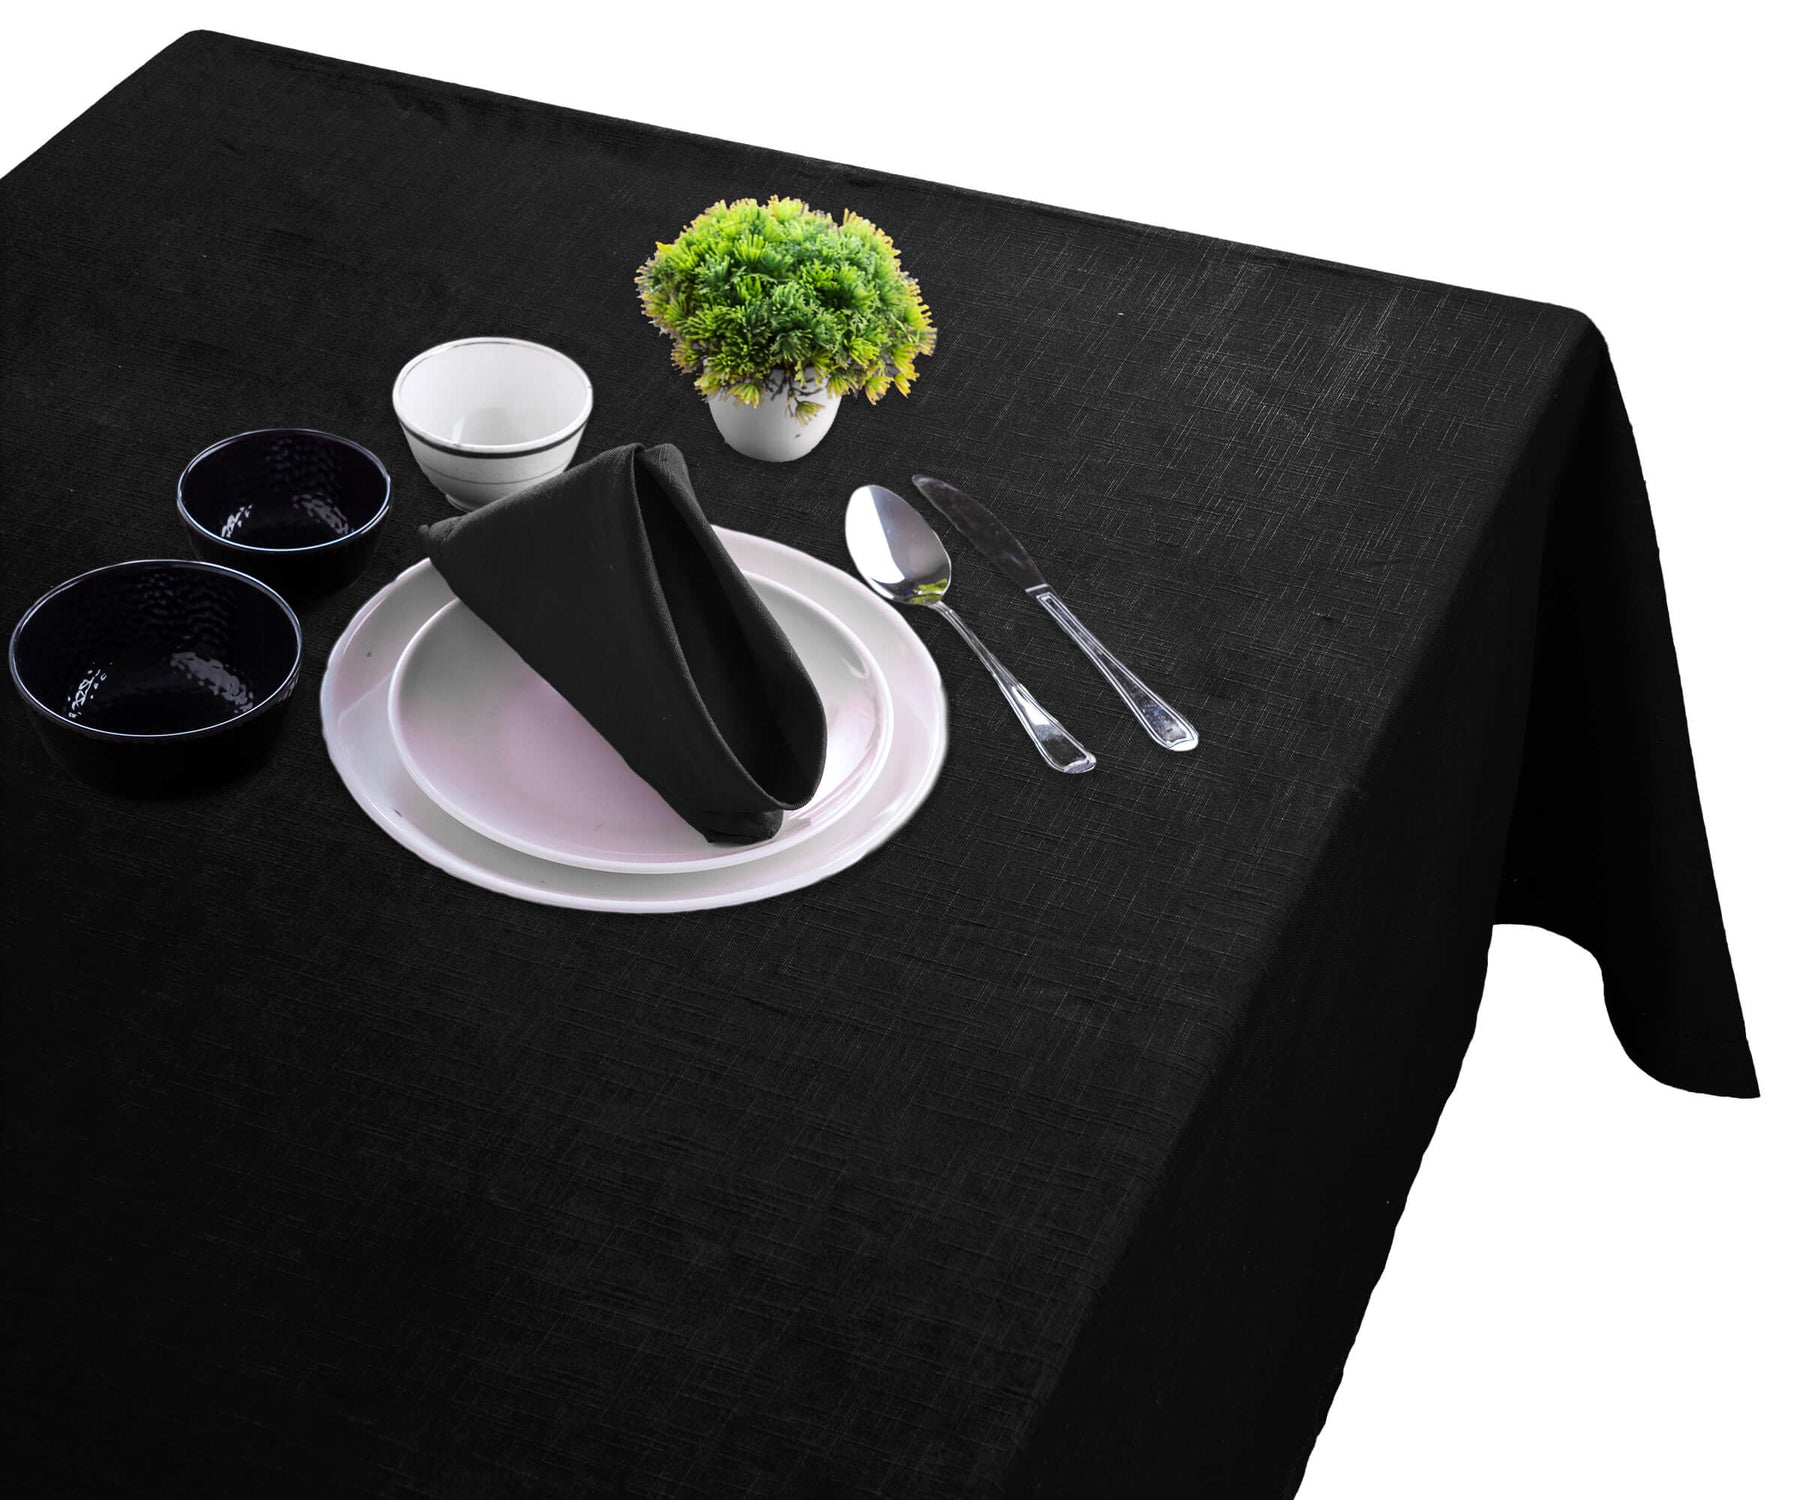 "Create elegance with black, welcome spring with themed charm, and celebrate holidays with specially designed tablecloths."